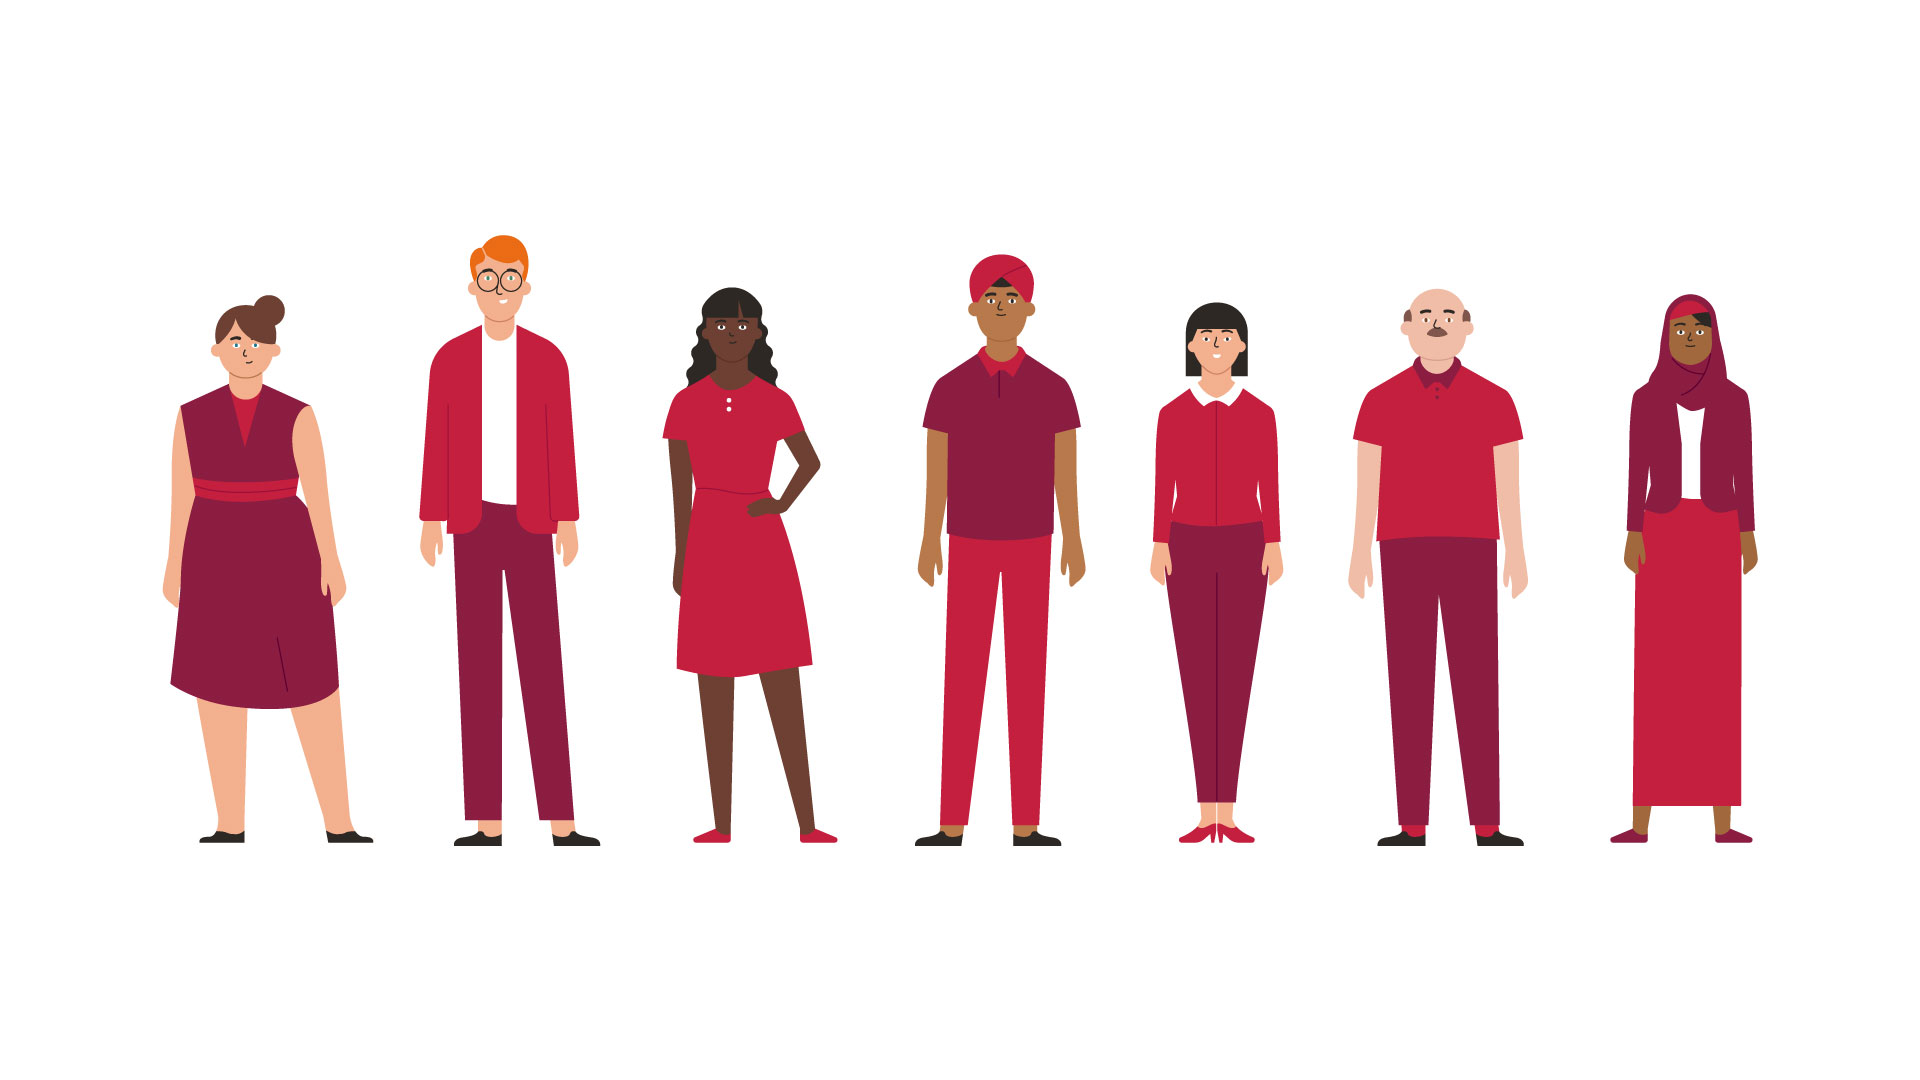 Vector illustration of different characters for the CIBC communications